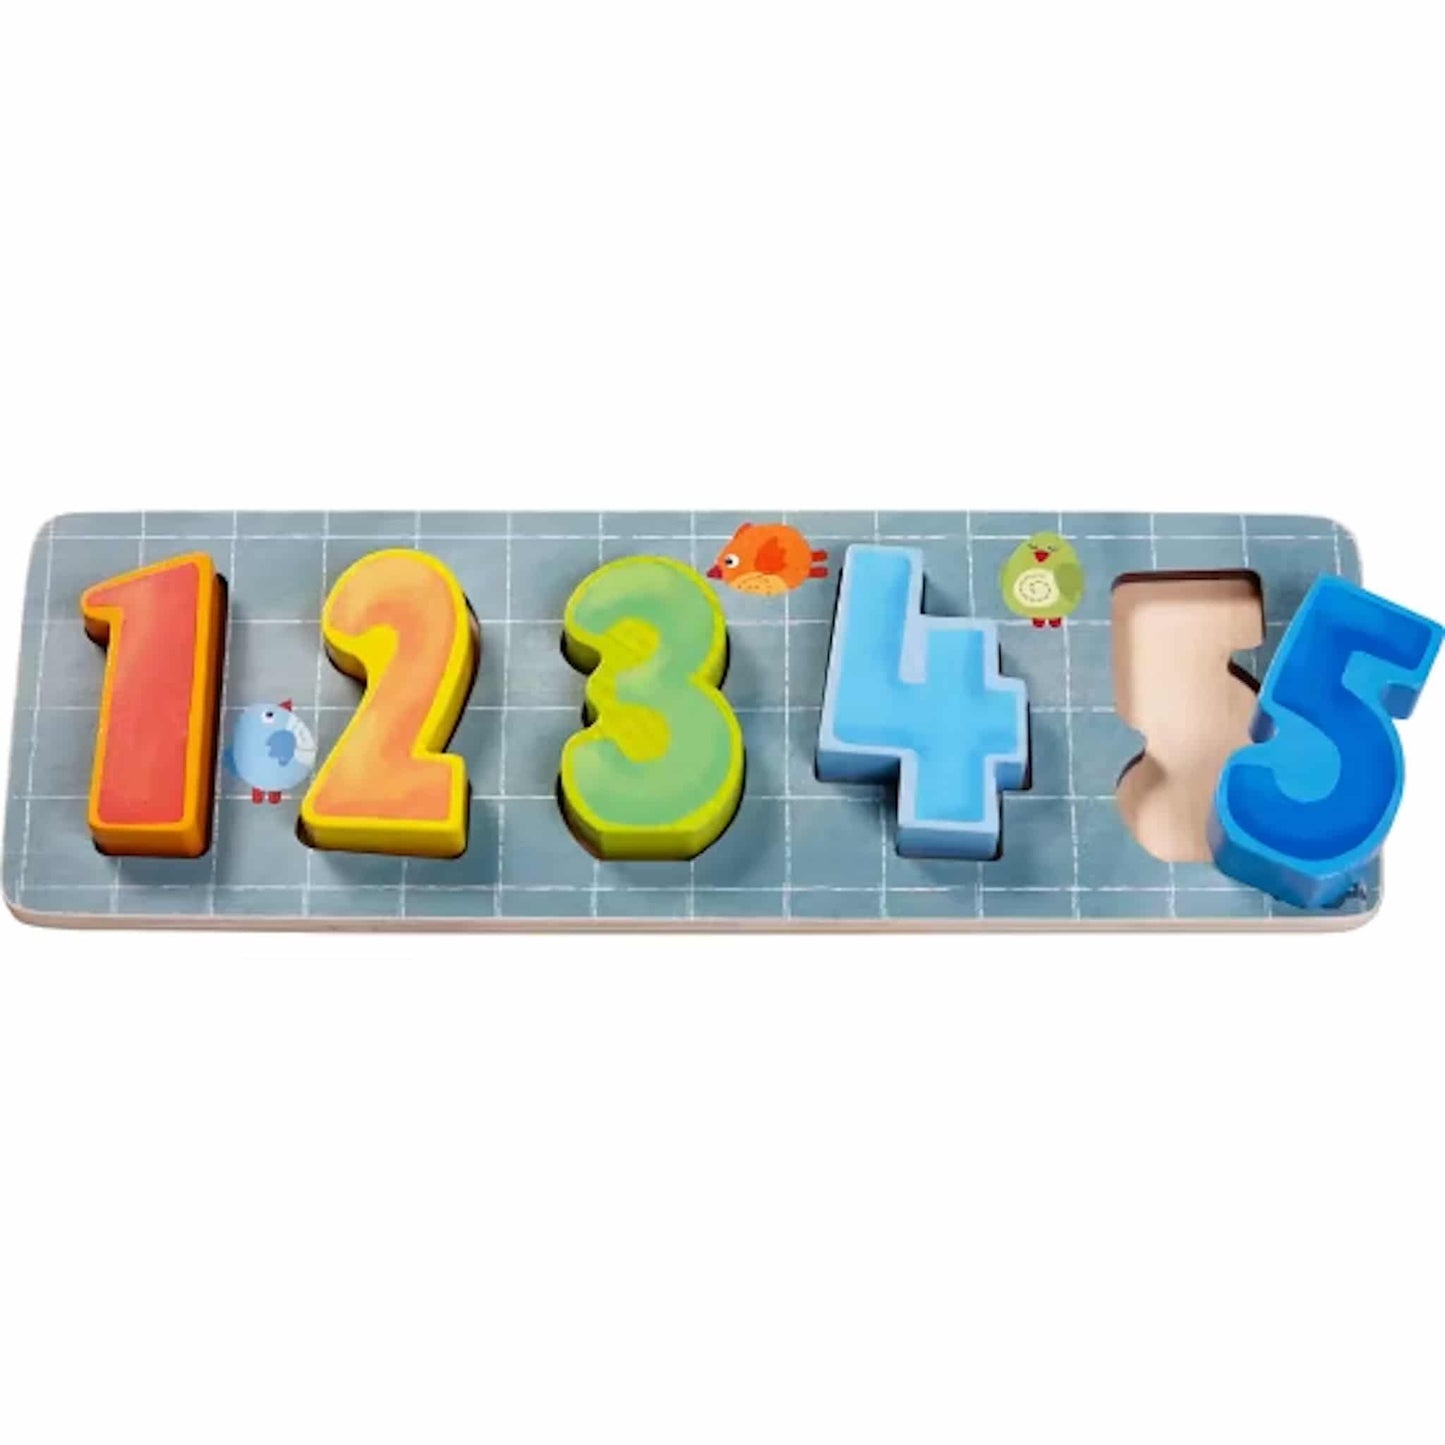 HABA Wooden Puzzle Fun with Numbers